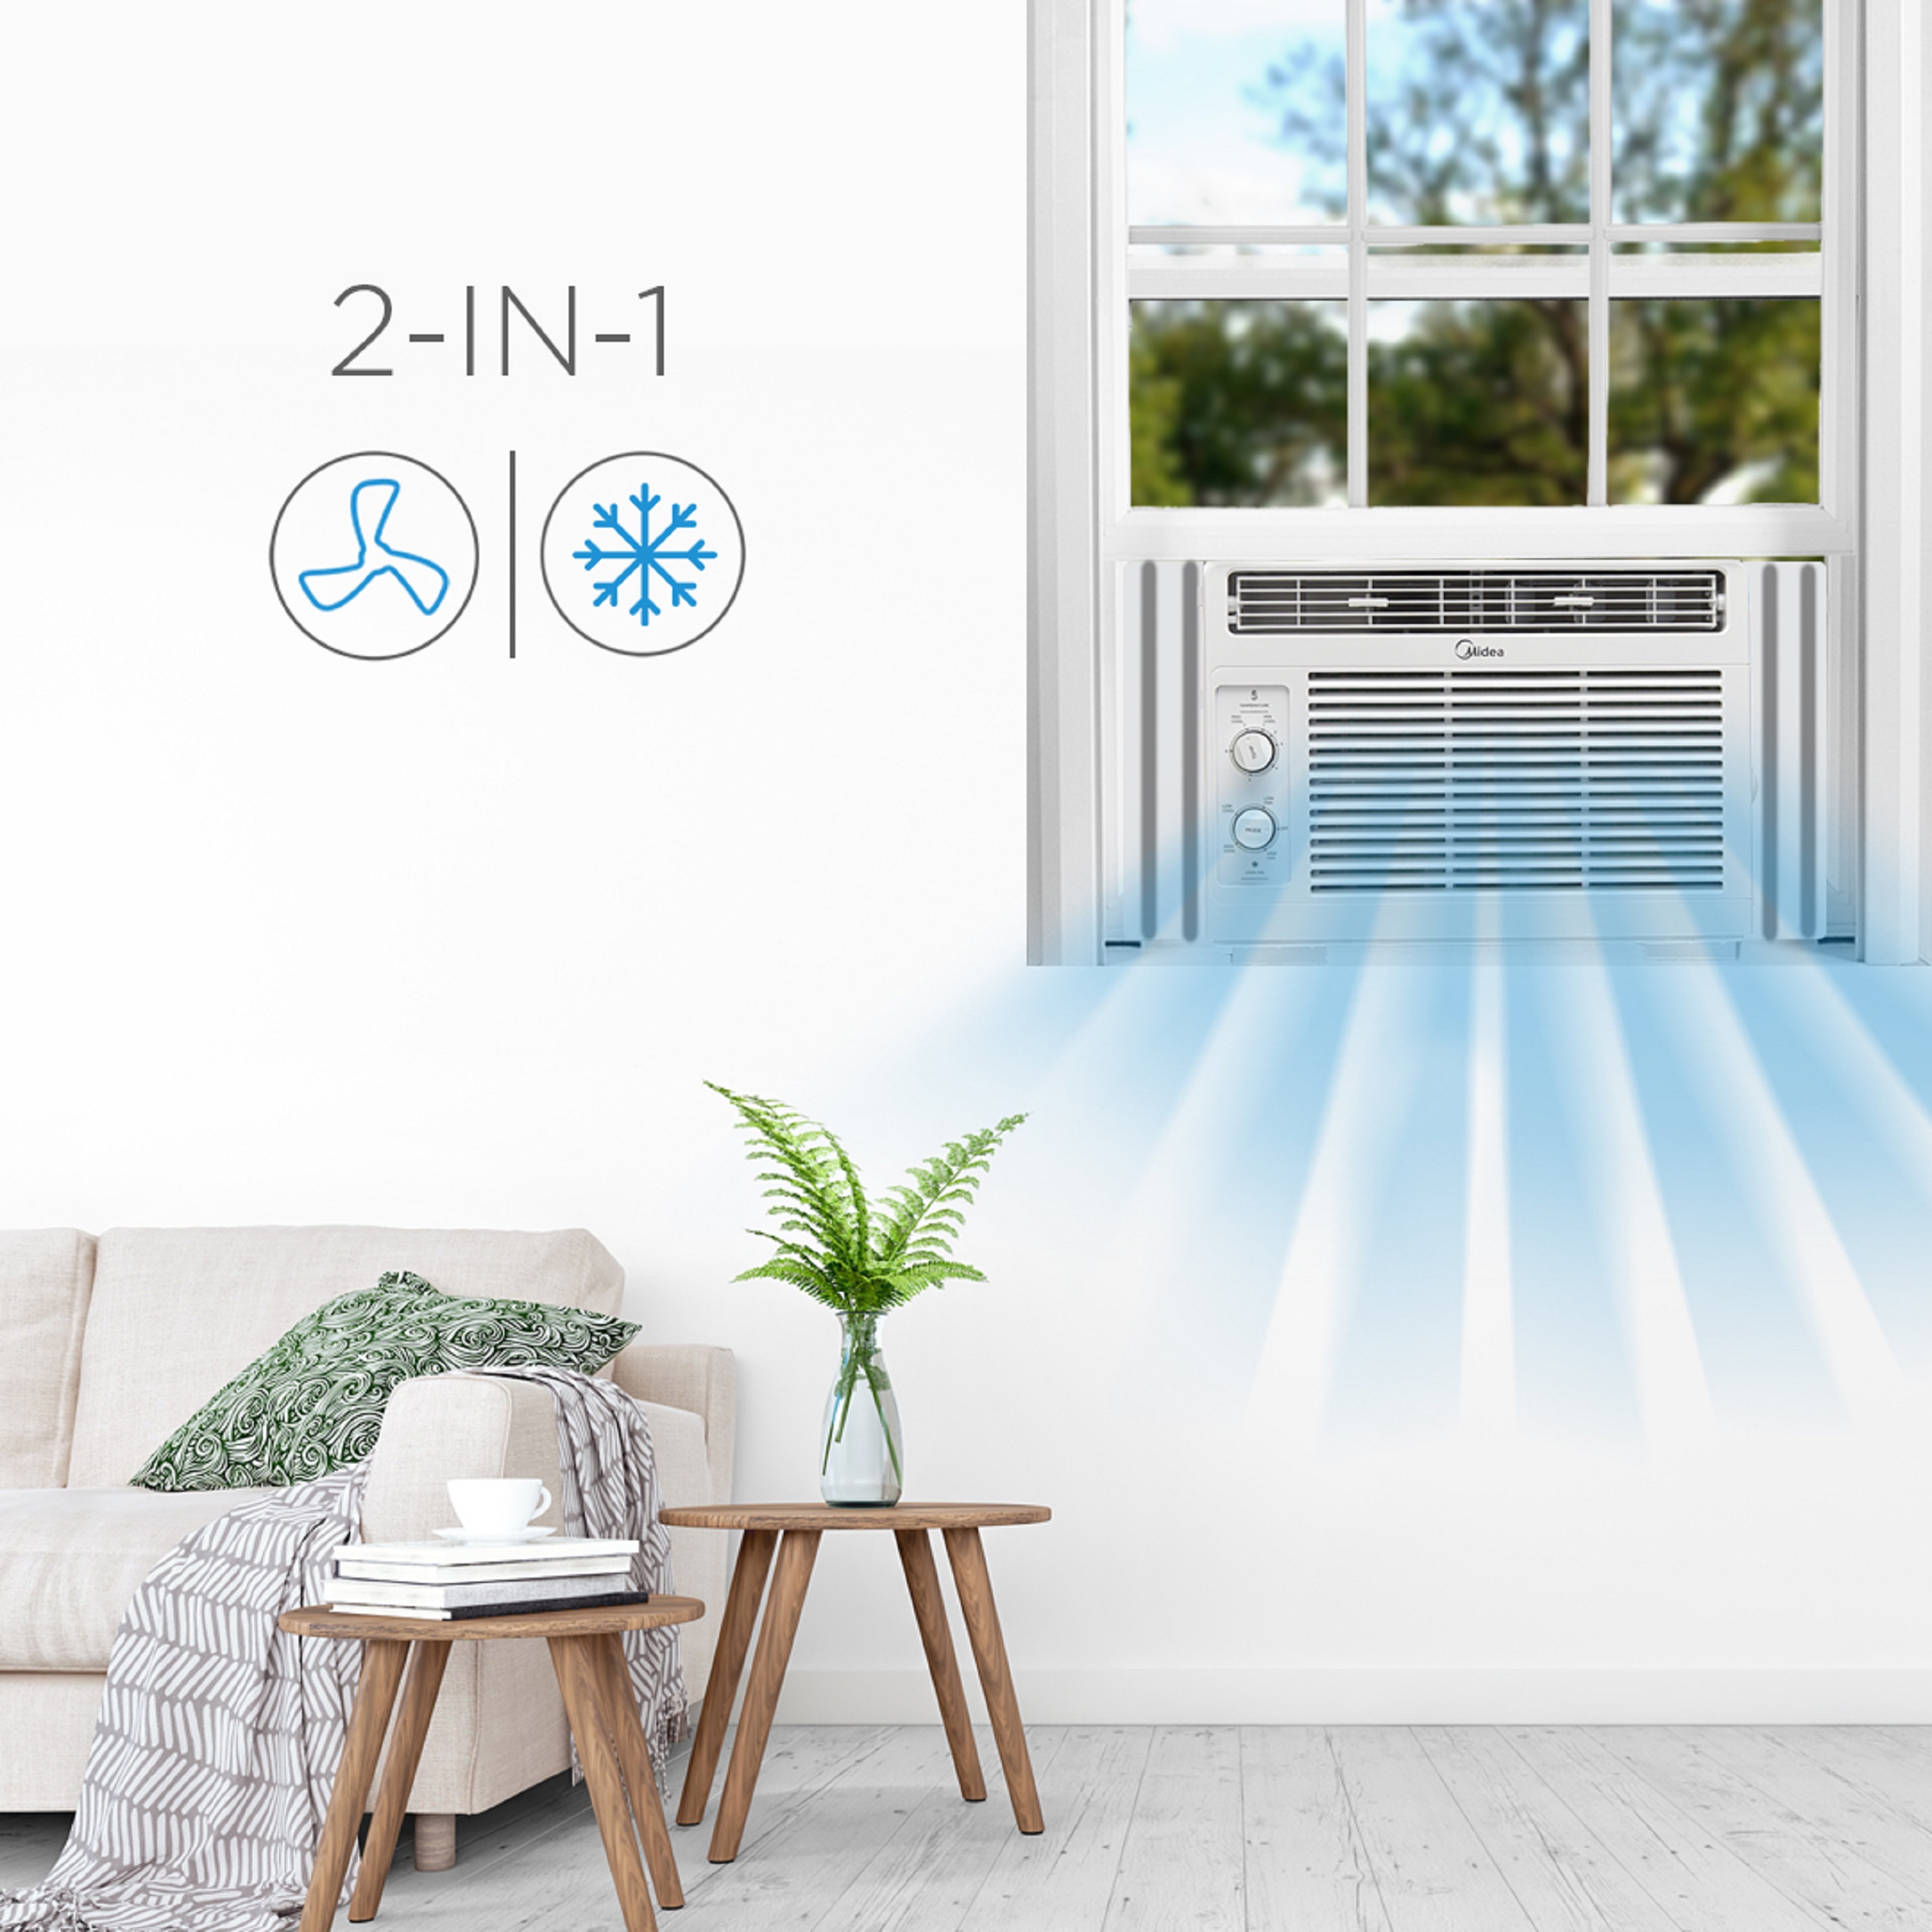 Midea 5,000 BTU 150 Sq Ft Mechanical Window Air Conditioner, White, MAW05M1WWT - image 5 of 17